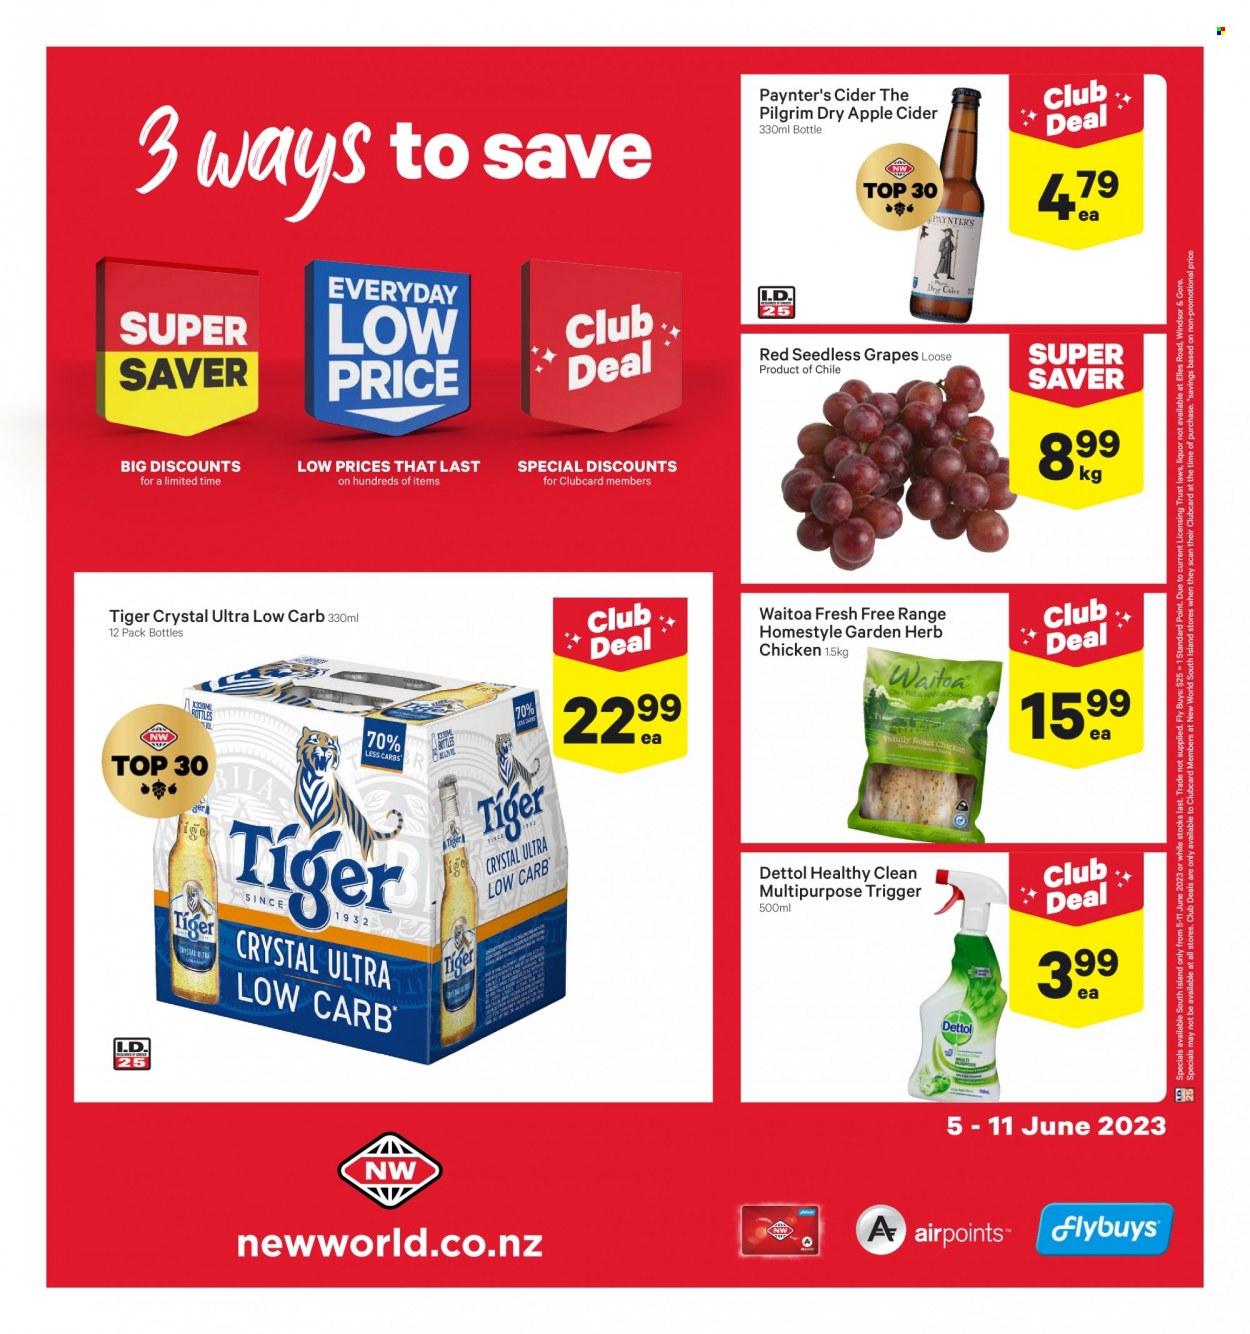 thumbnail - New World mailer - 05.06.2023 - 11.06.2023 - Sales products - grapes, seedless grapes, herbs, alcohol, apple cider, cider, chicken, Dettol. Page 2.